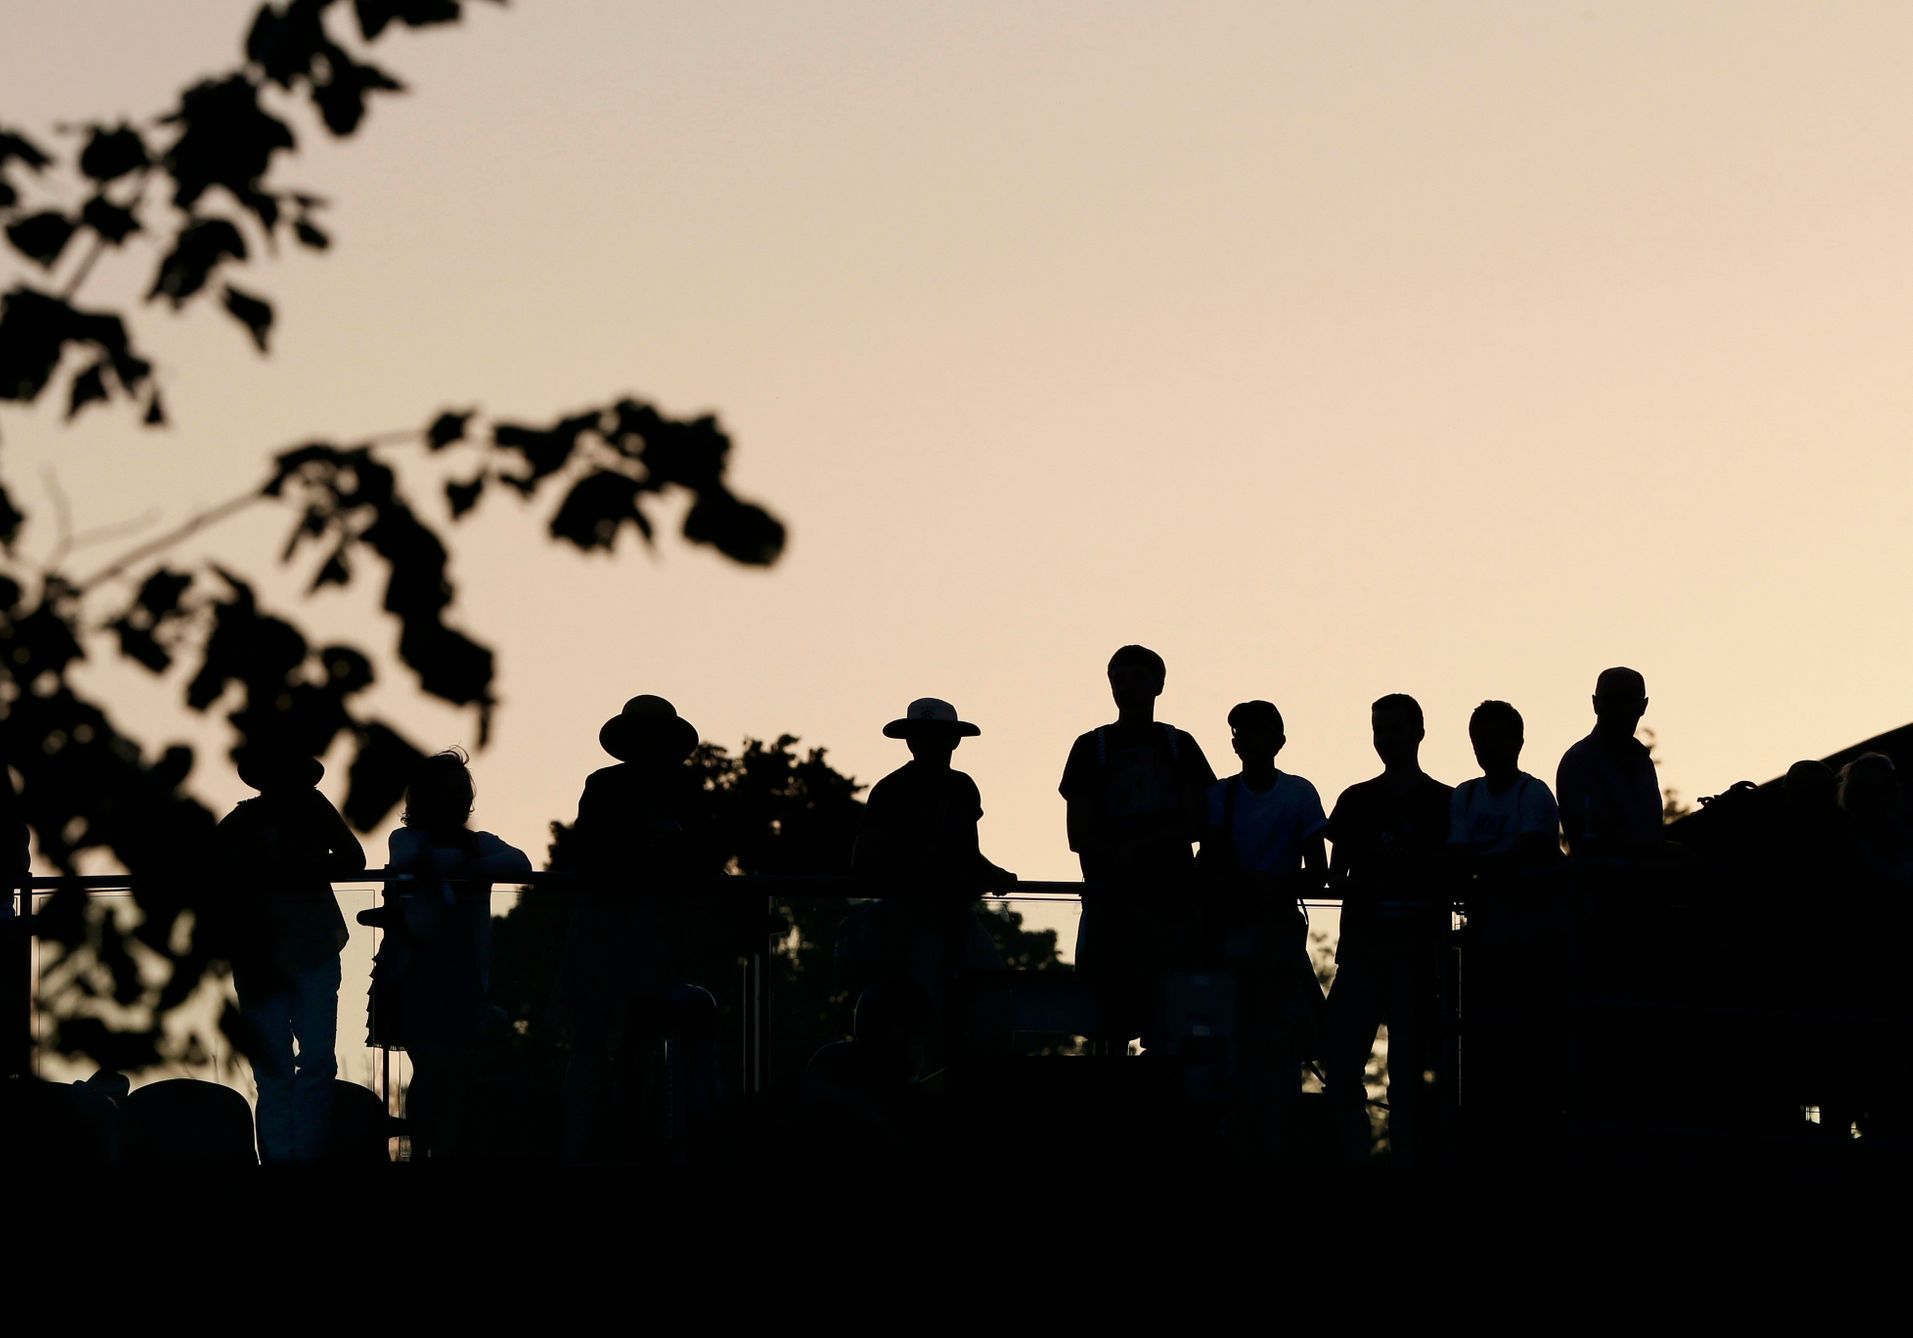 Spectators watch at the Wimbledon Tennis Championships in London